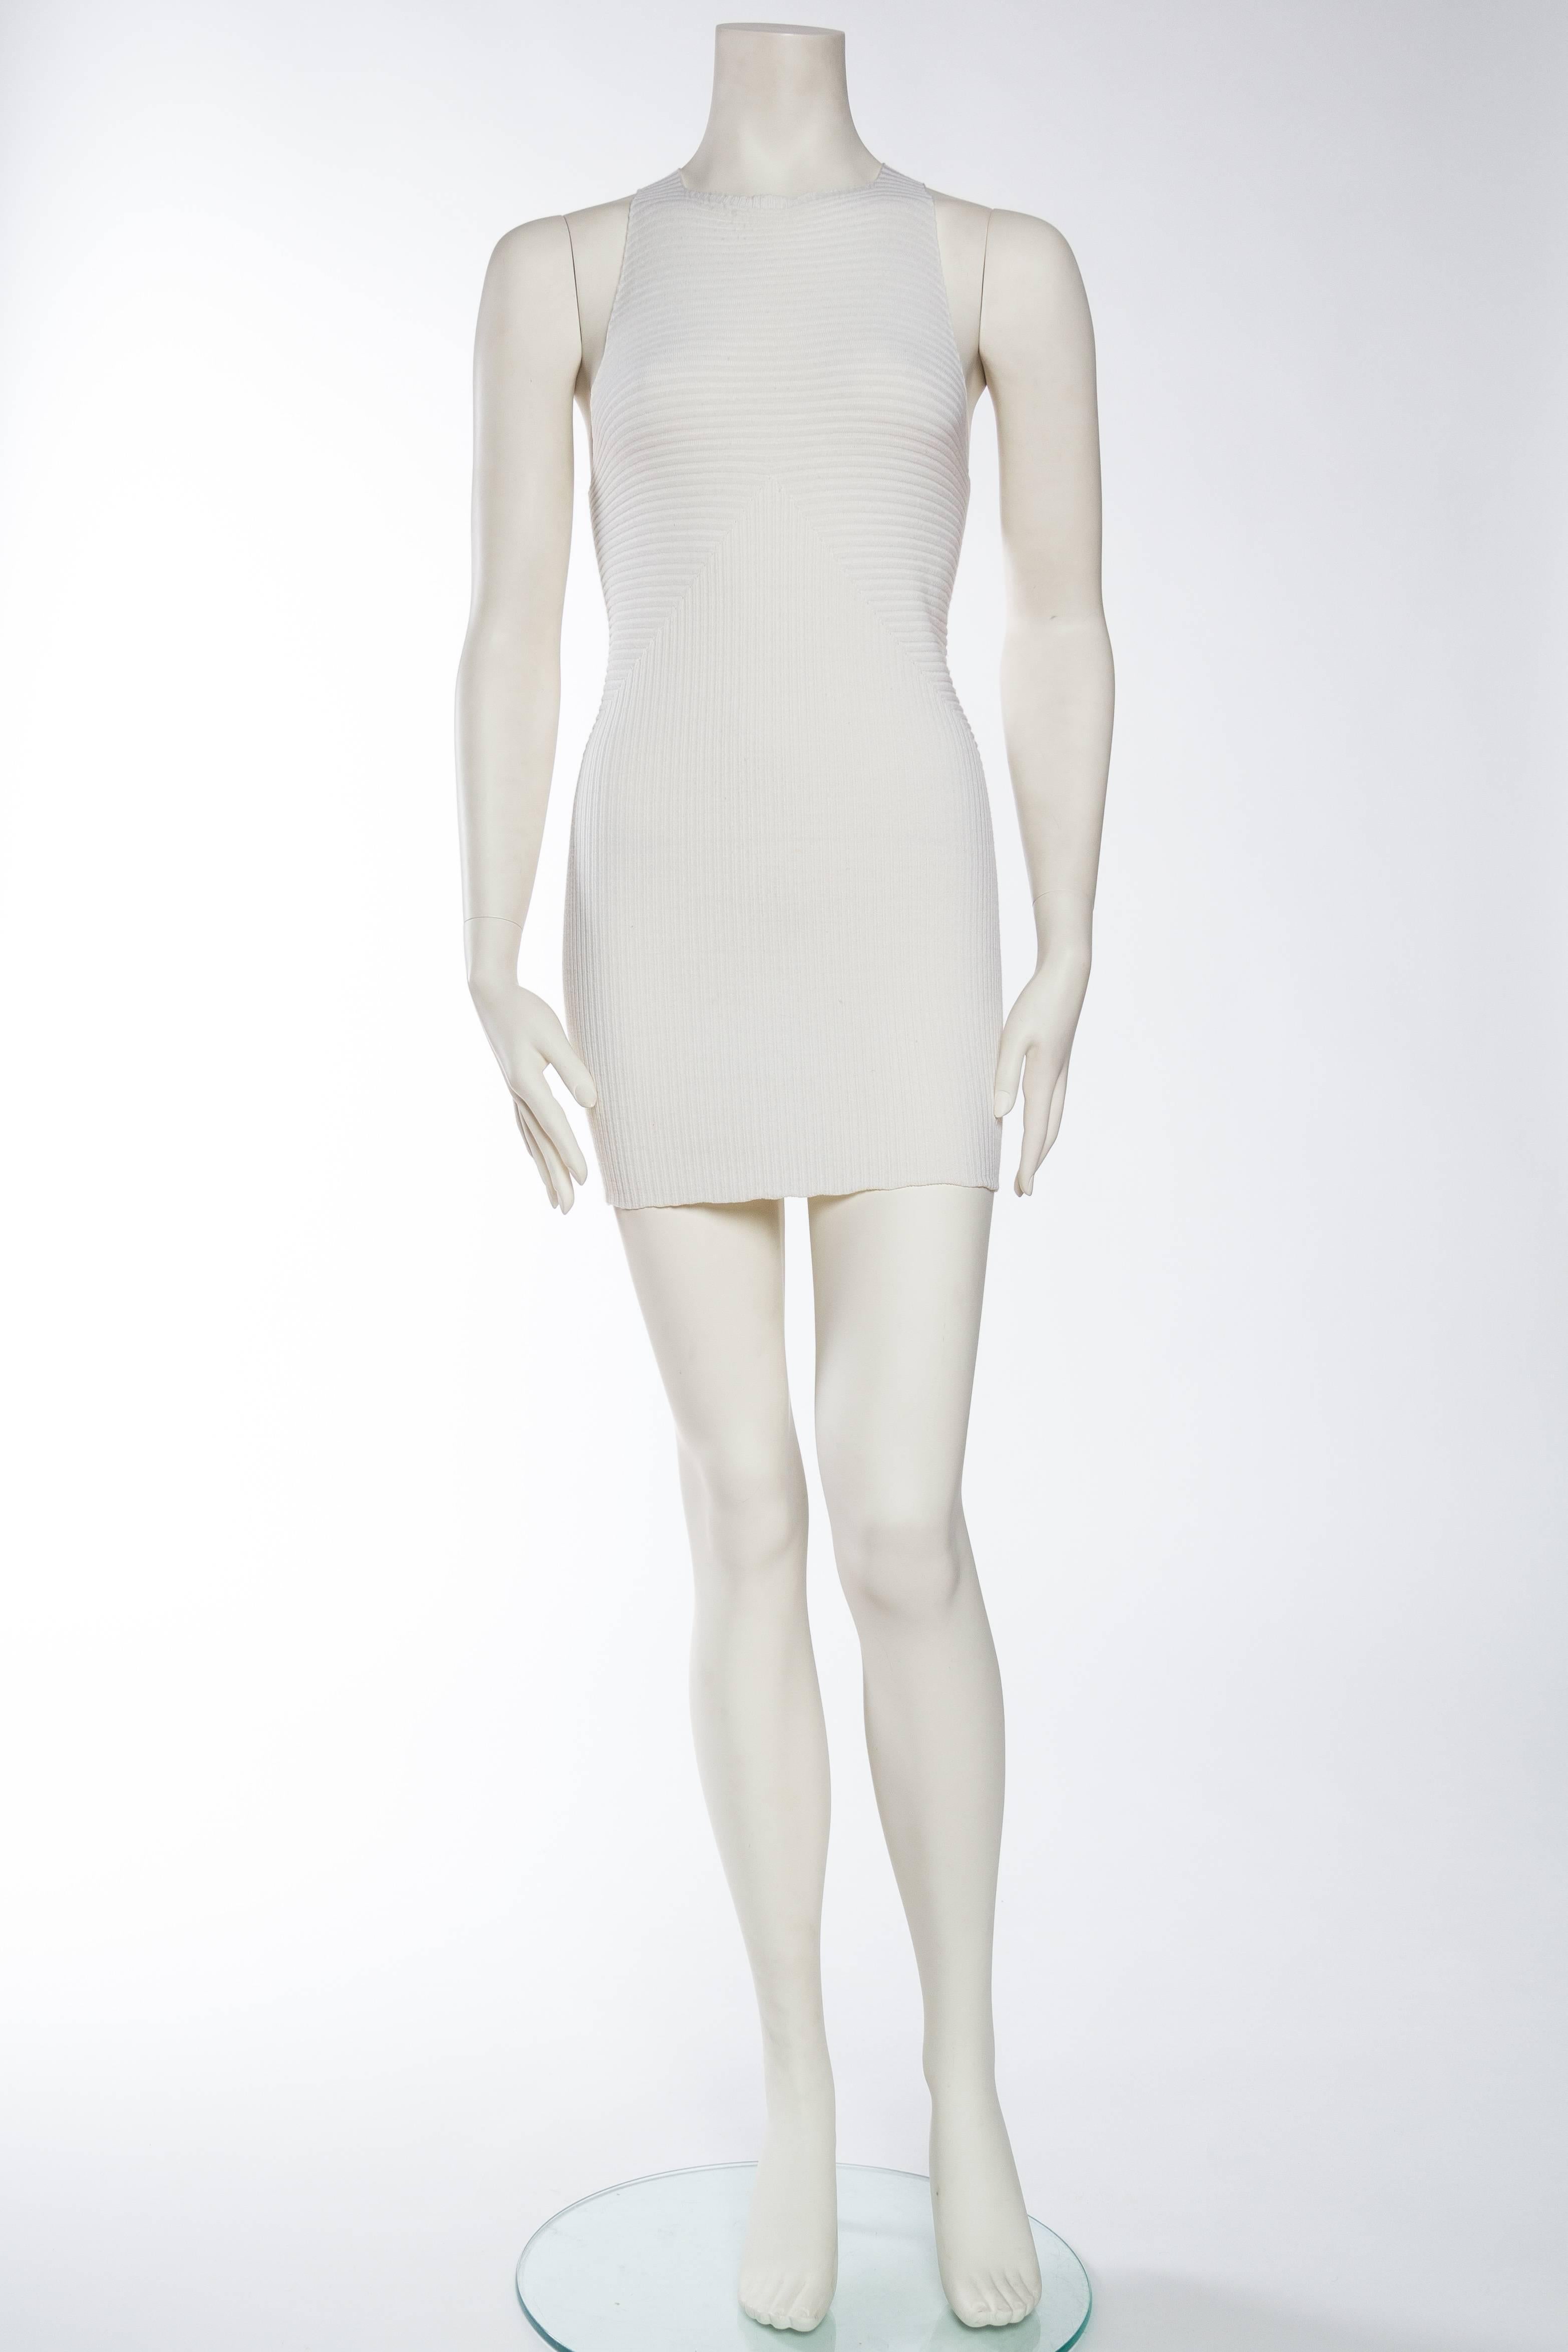 Rick Owens Body-Con Minimalist Little White Dress In Excellent Condition In New York, NY